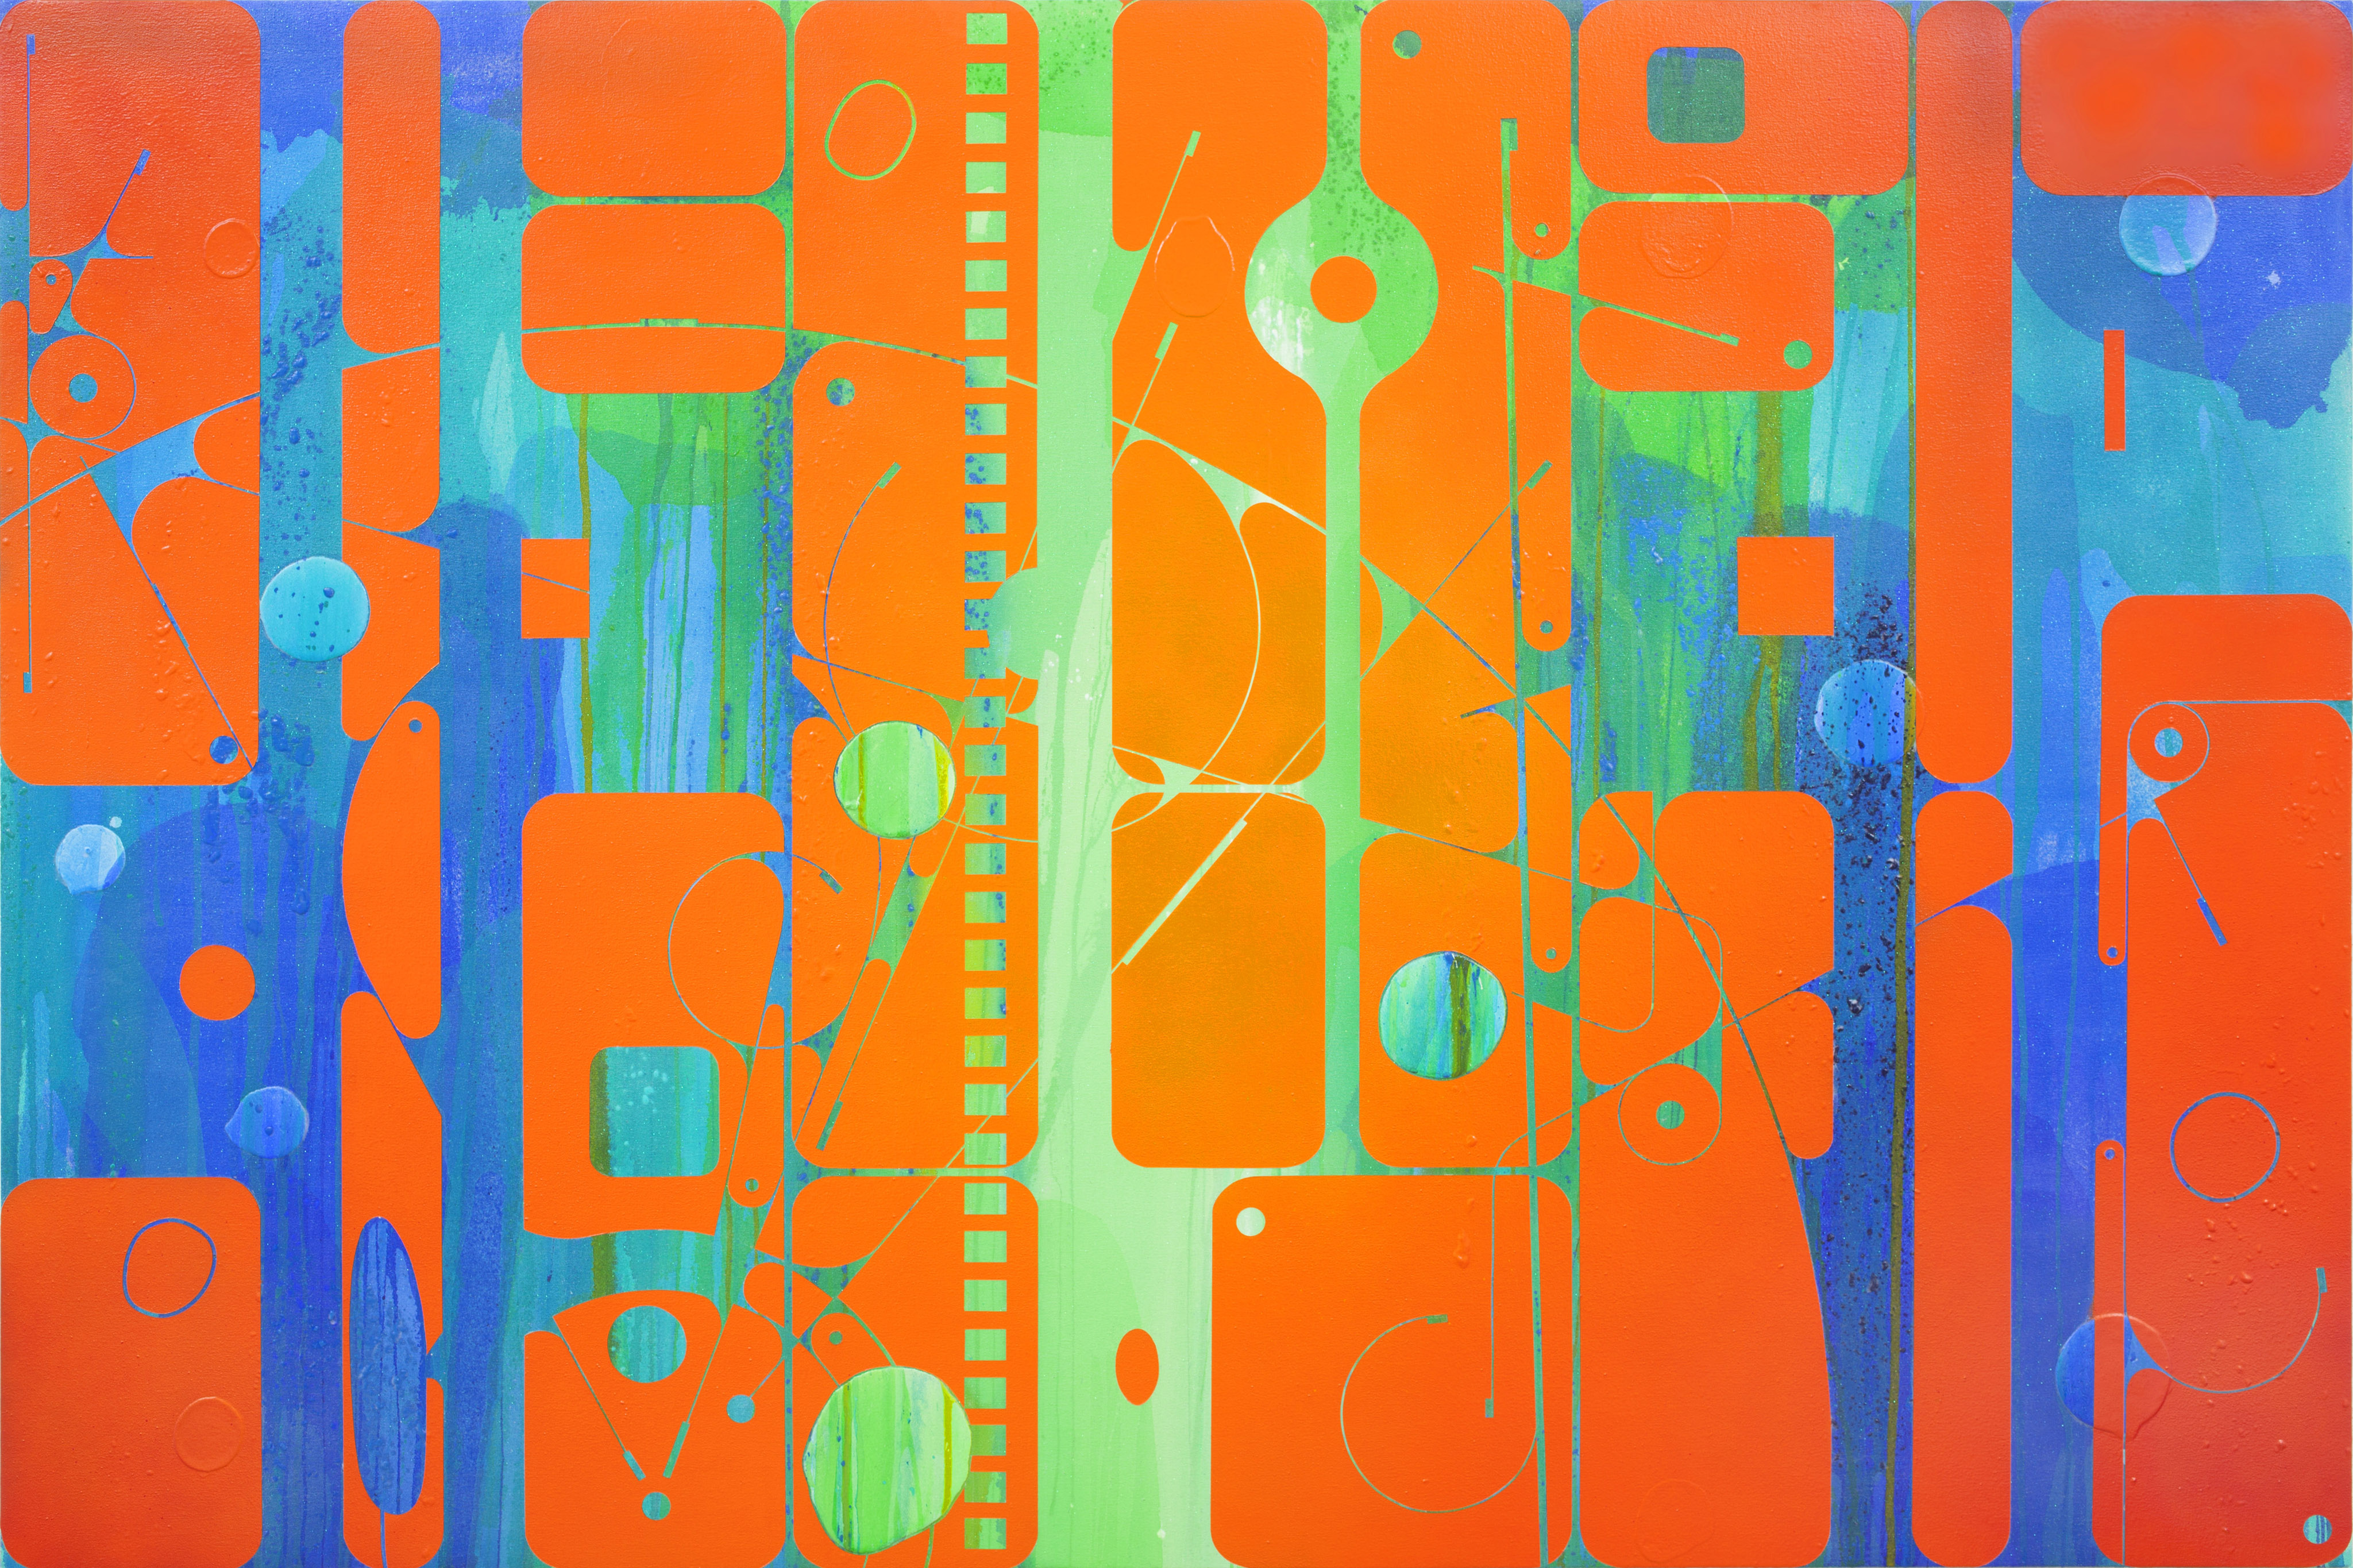 Large abstract painting with a bright orange background. Layered on top of the background are bright blue and green horizontal lines